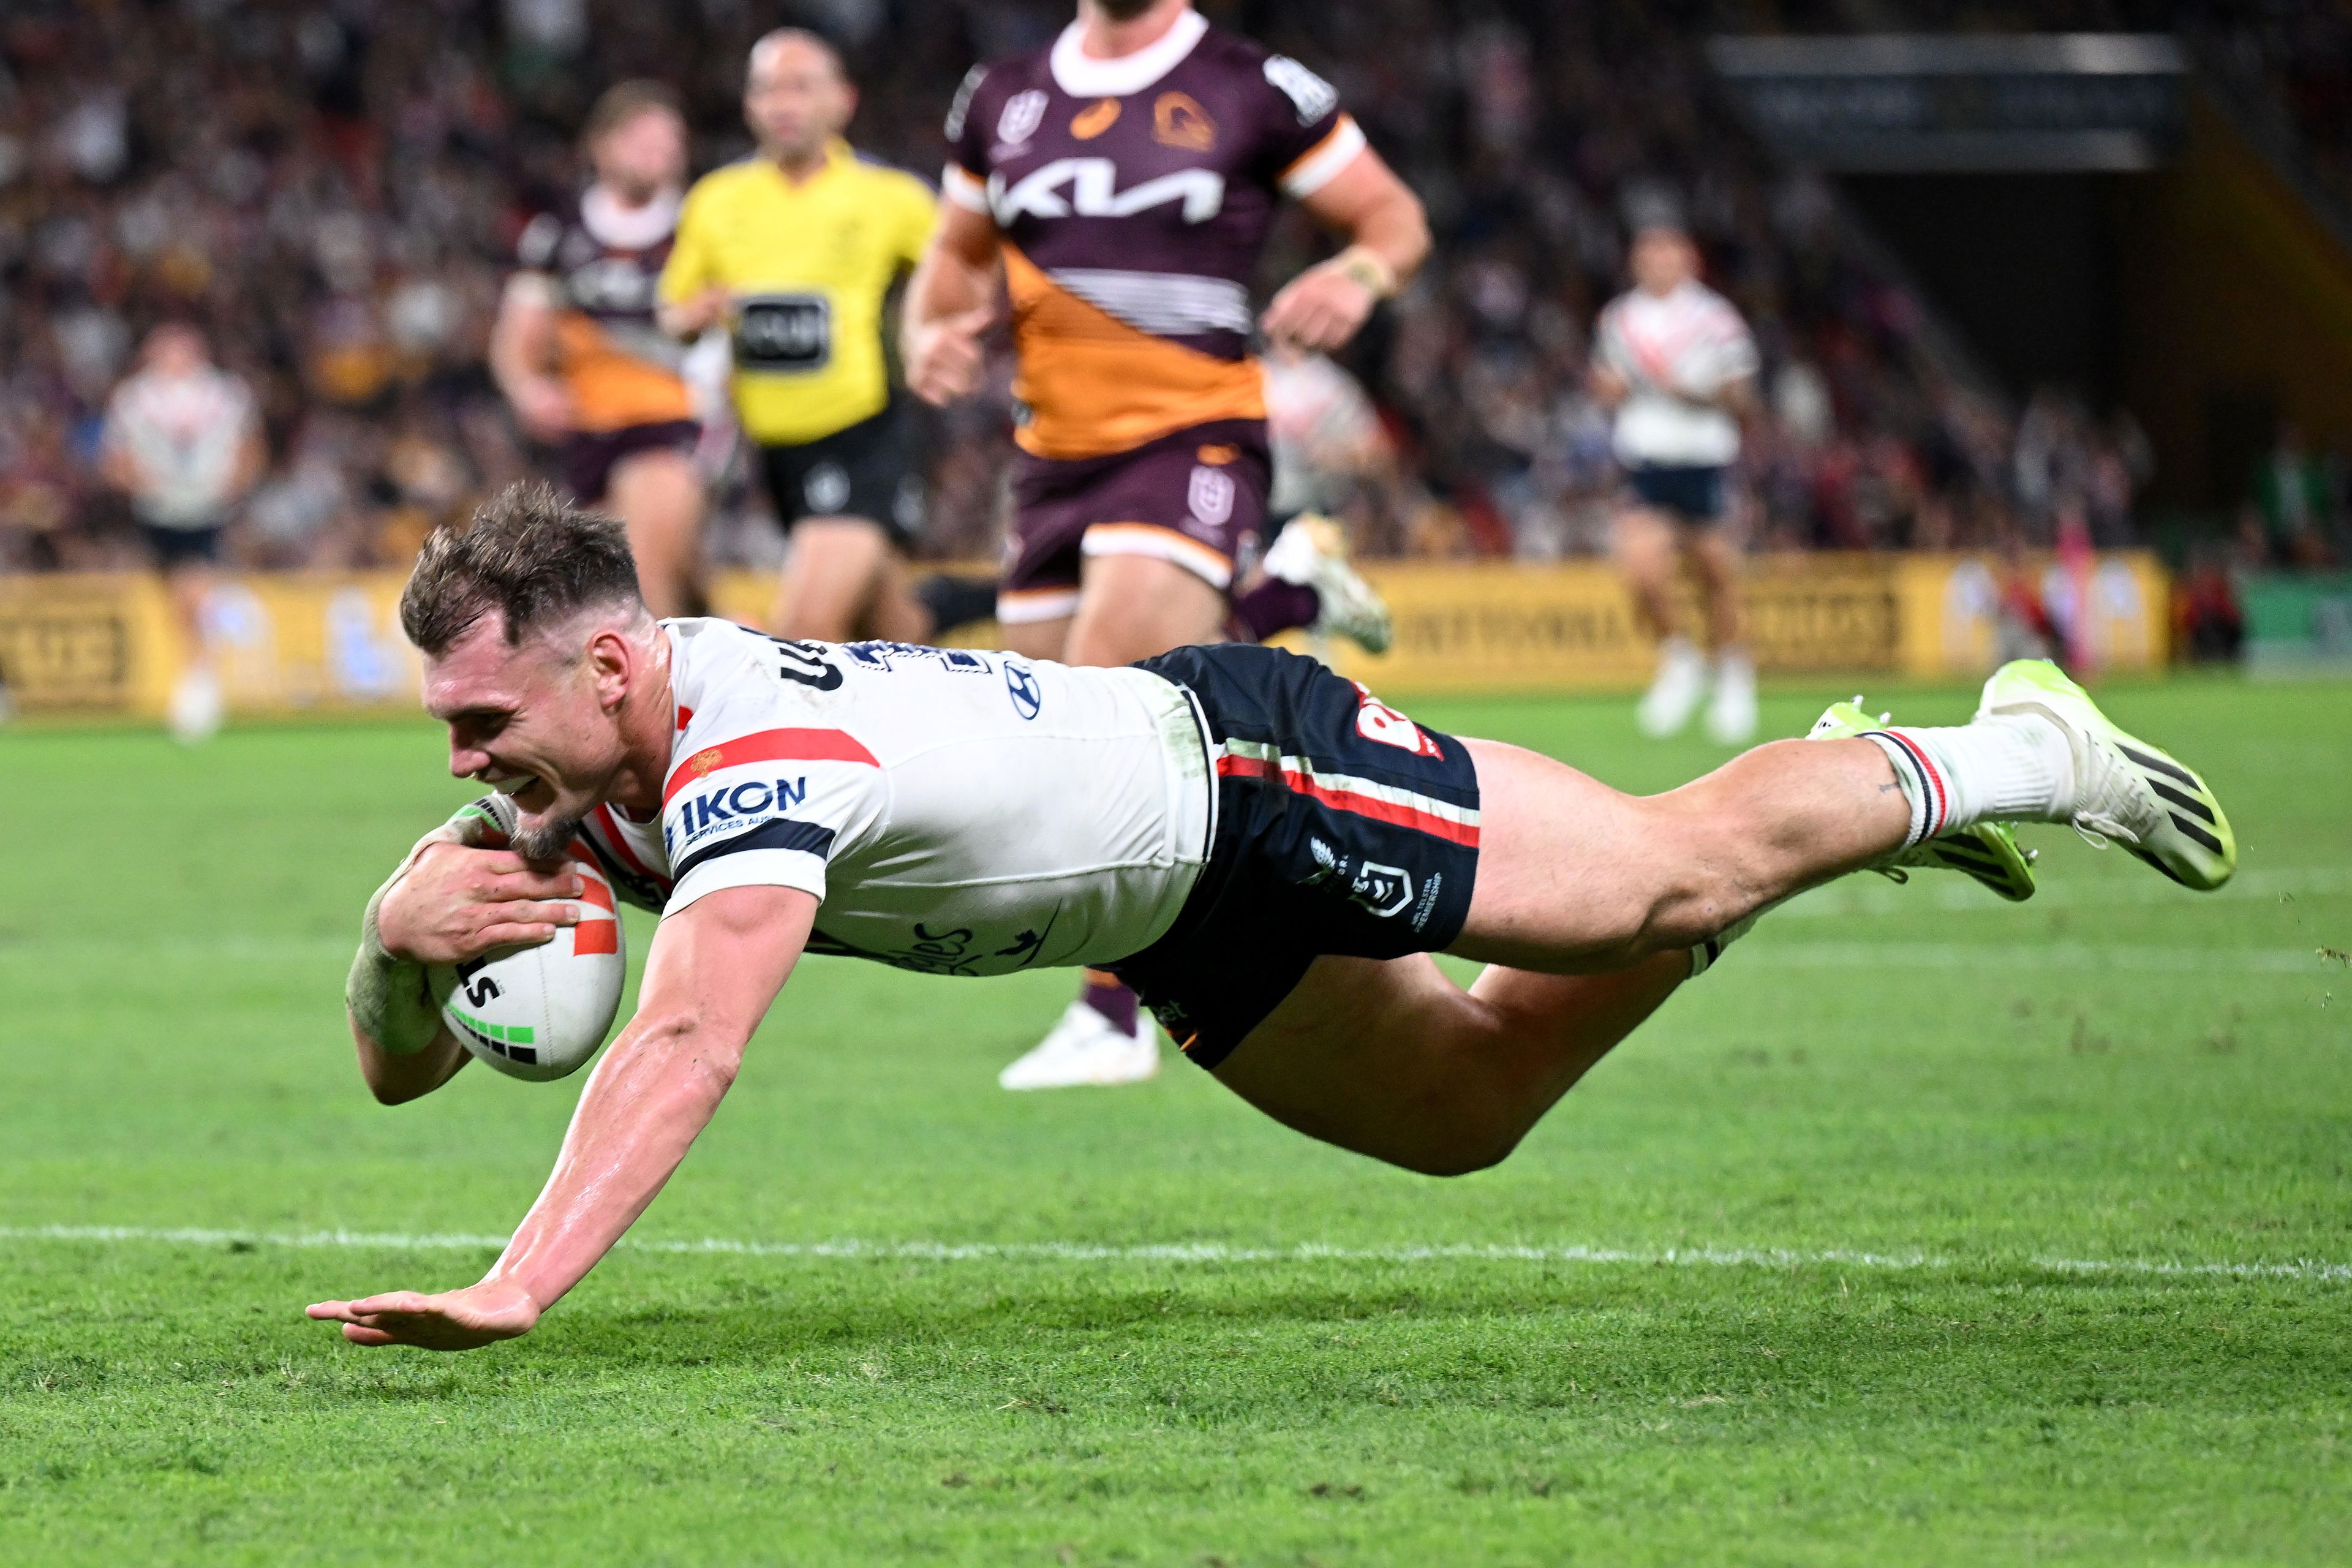 NRL Friday AS IT HAPPENED: Angus Crichton's double helps Roosters smash Broncos; Adam Reynolds suffers suspected season-ending bicep injury; Jesse Arthars sent to hospital with suspected broken jaw